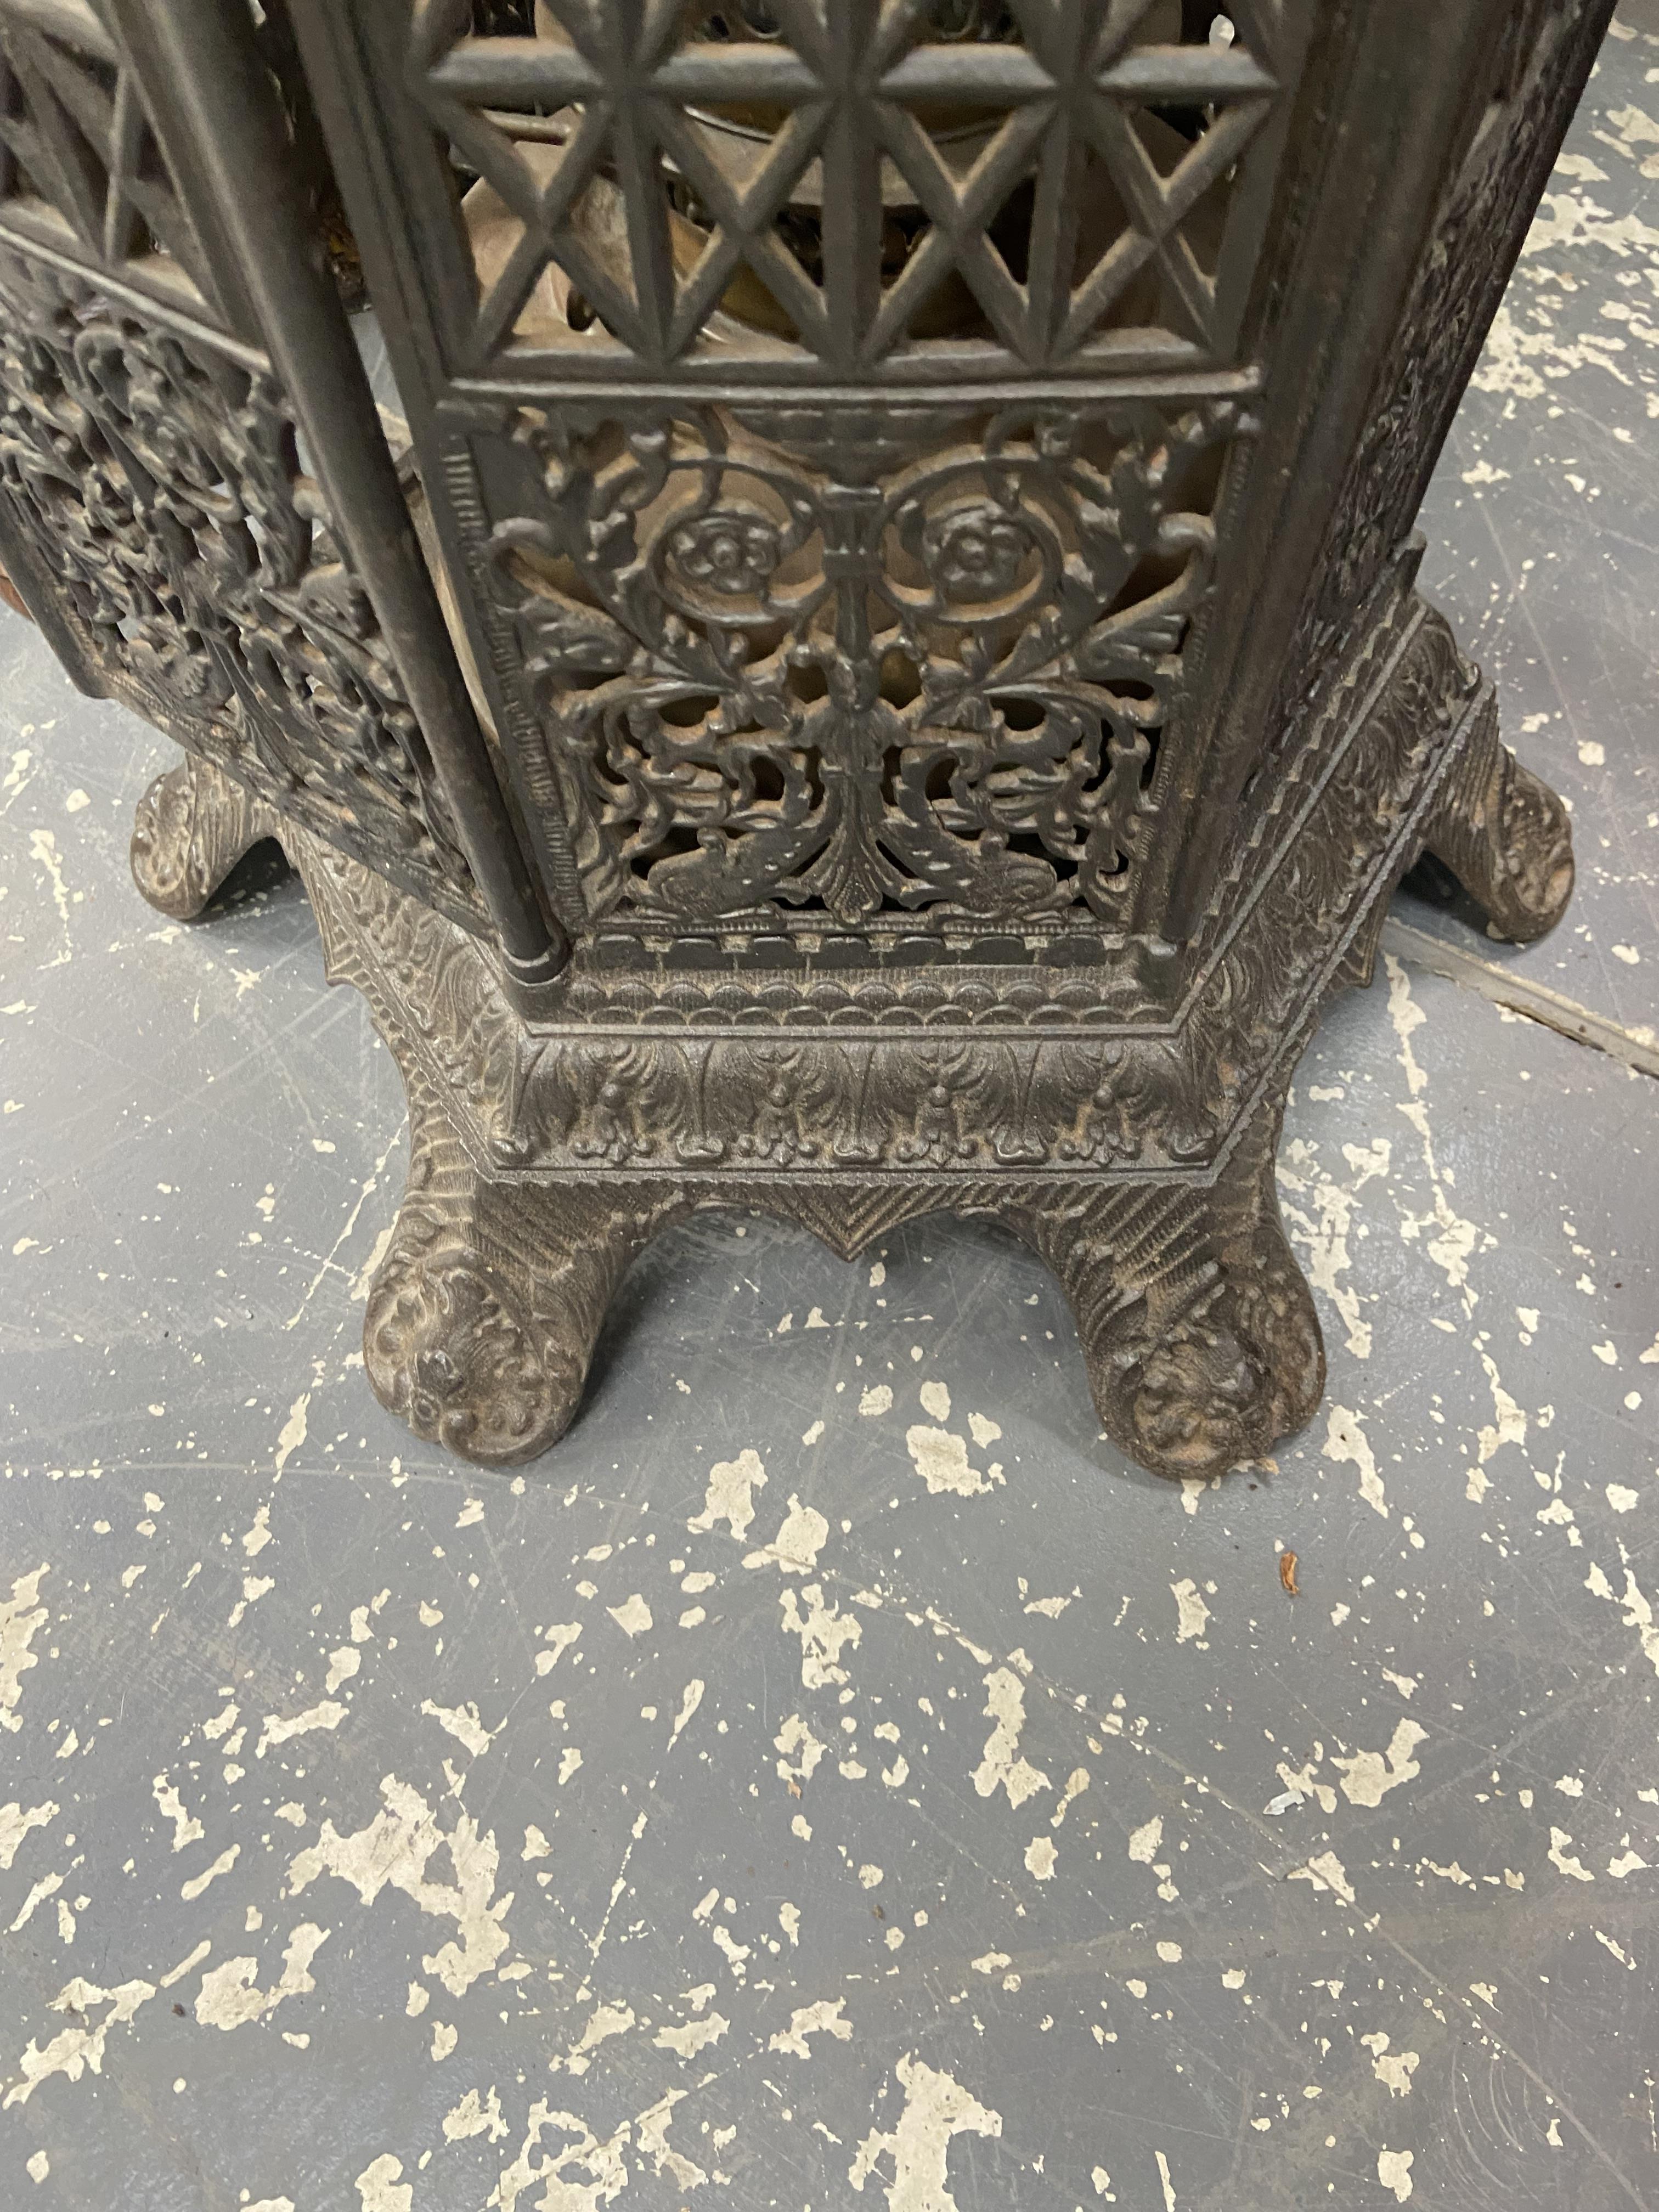 A CAST IRON CONSERVATORY HEATER. H 70 x w 30 cms. - Image 3 of 7